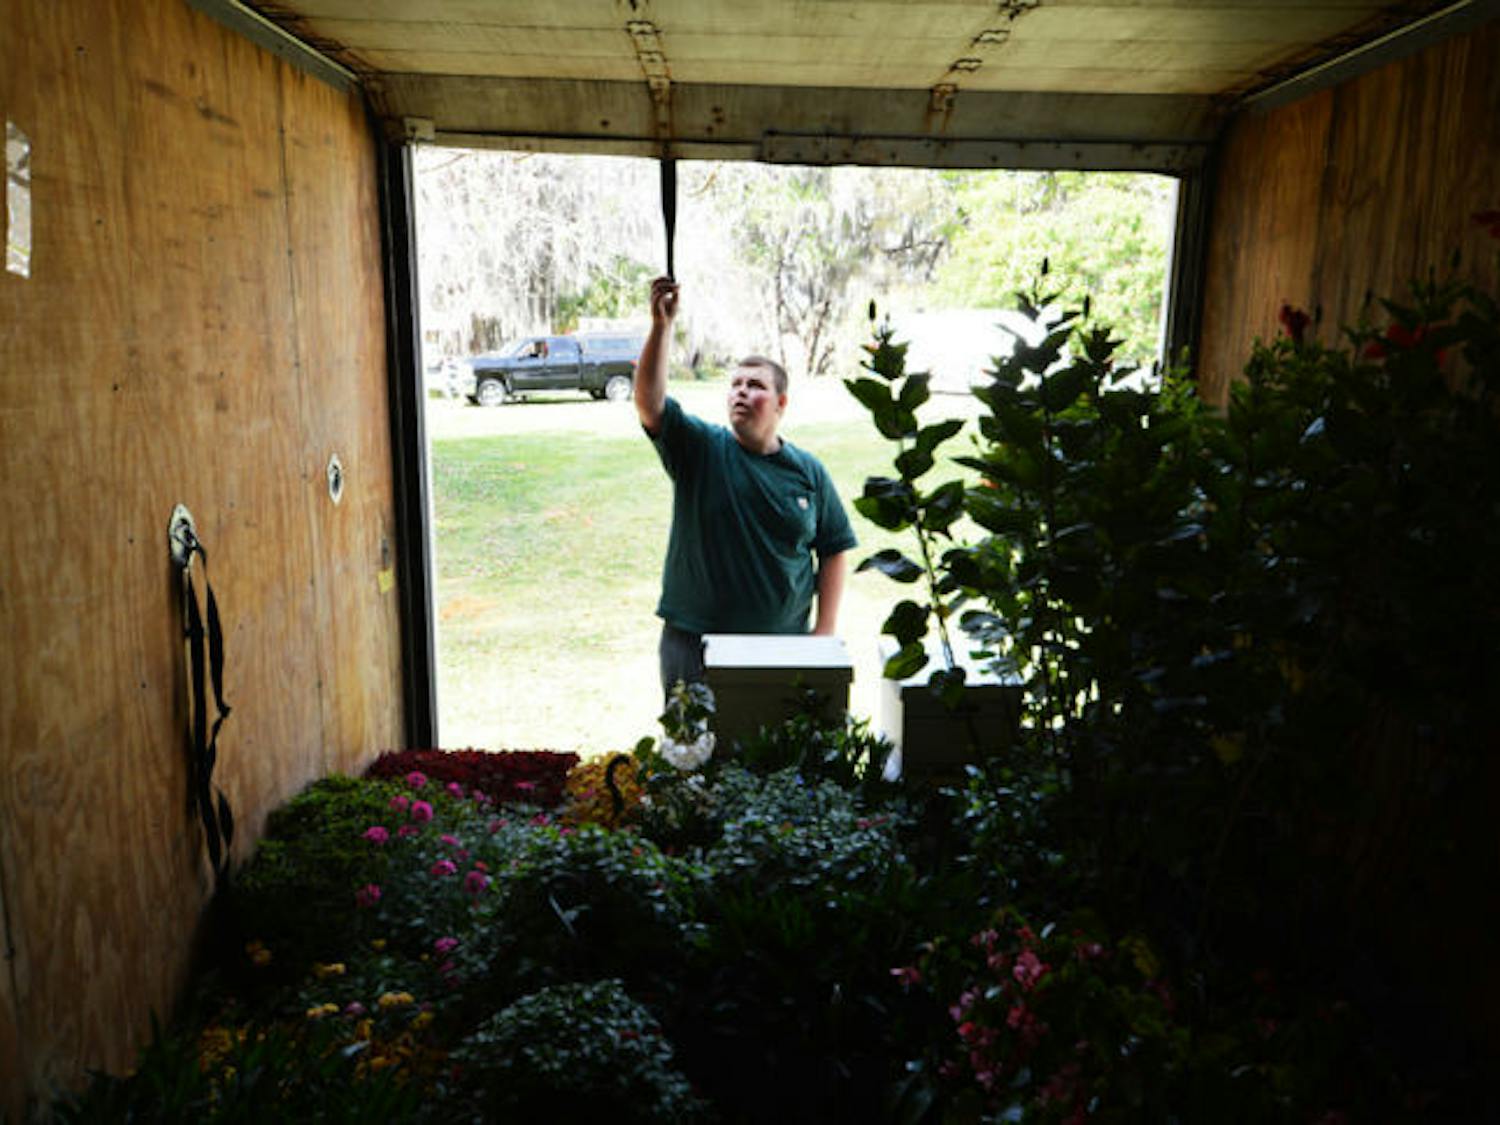 J.R. Trimm, 16, of Bronson, loads plants to his box truck at the Kanapaha Botanical Gardens on Thursday afternoon. This weekend is the Spring Festival at the gardens, located at 4700 SW 58th Drive.